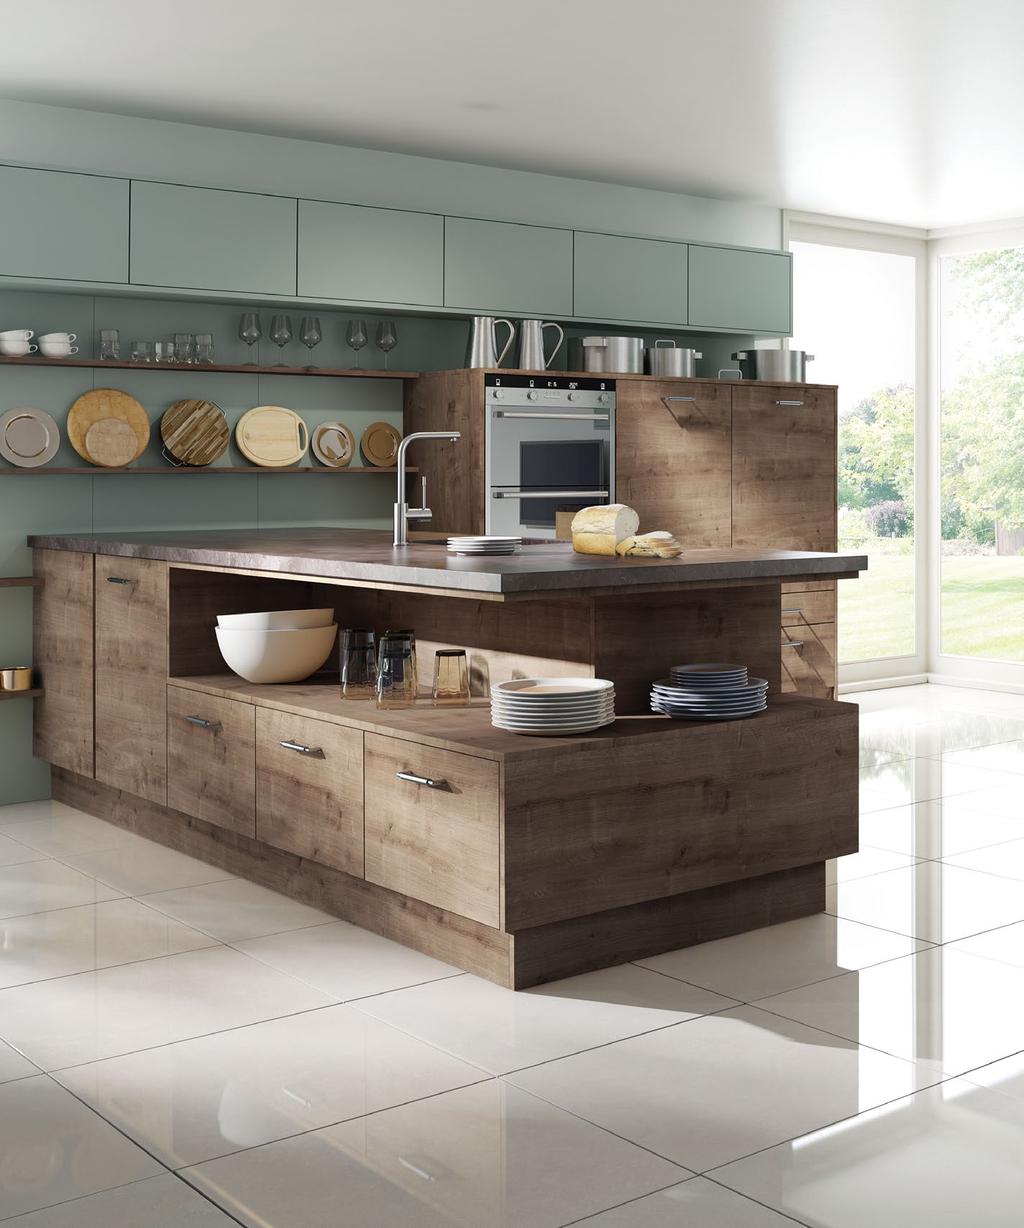 natural woodgrains, accents of colour and contemporary touches. Available in horizontal and vertical woodgrain.